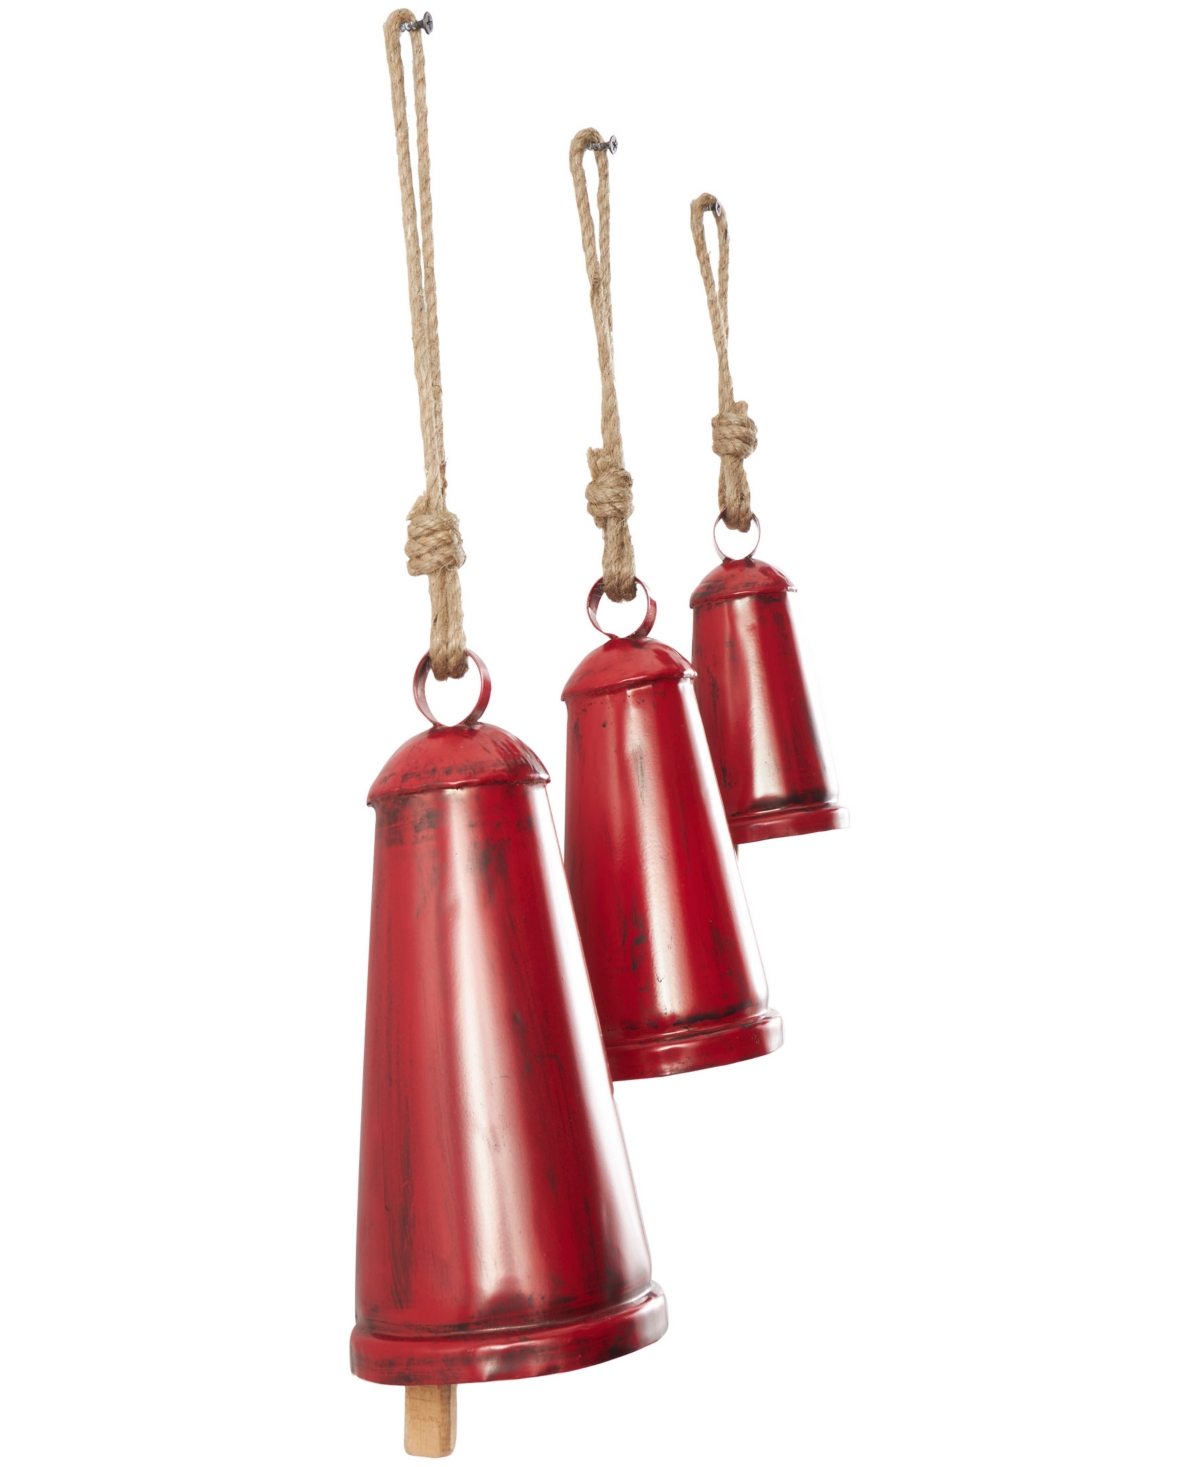 Rosemary Lane Metal Tibetan Inspired Decorative Cow Bell With Jute Hanging Rope, Set Of 3, 12",9",6"h In Red